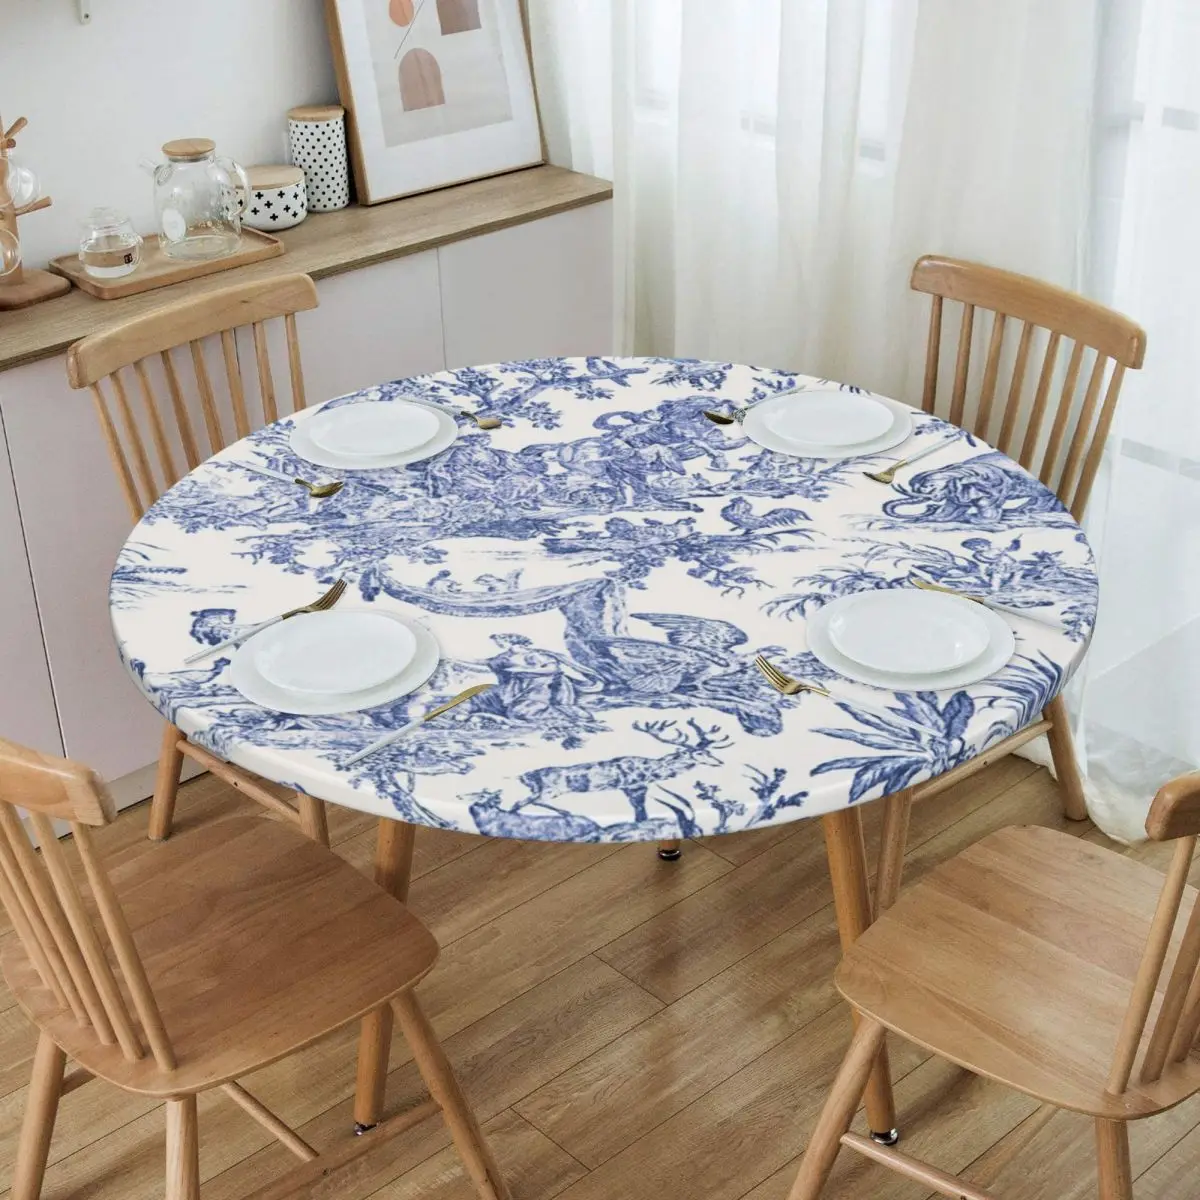 

Navy Blue Toile De Jouy Tablecloth Round Elastic Oilproof French Countryside Floral Table Cover Cloth for Banquet